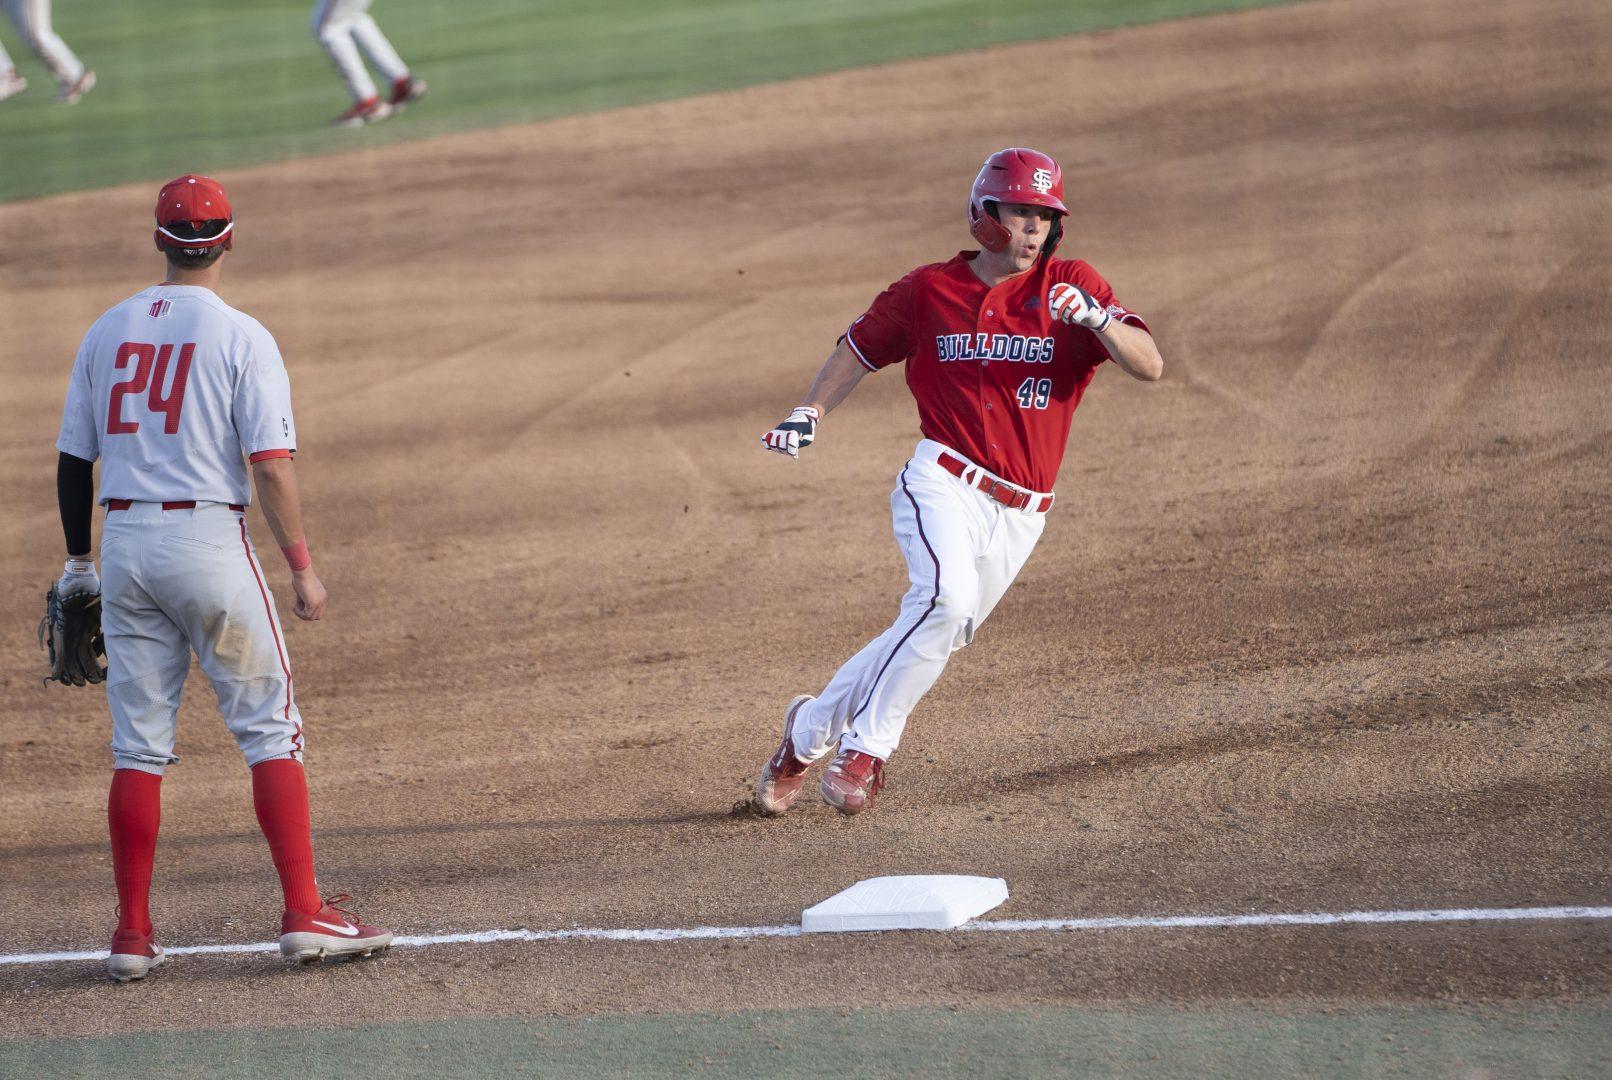 Tommy Hopfe rounds the base in the game against New Mexico on April 9, 2022 on Pete Beiden Field at Bob Bennett Stadium. (Wyatt Bible/ The Collegian)